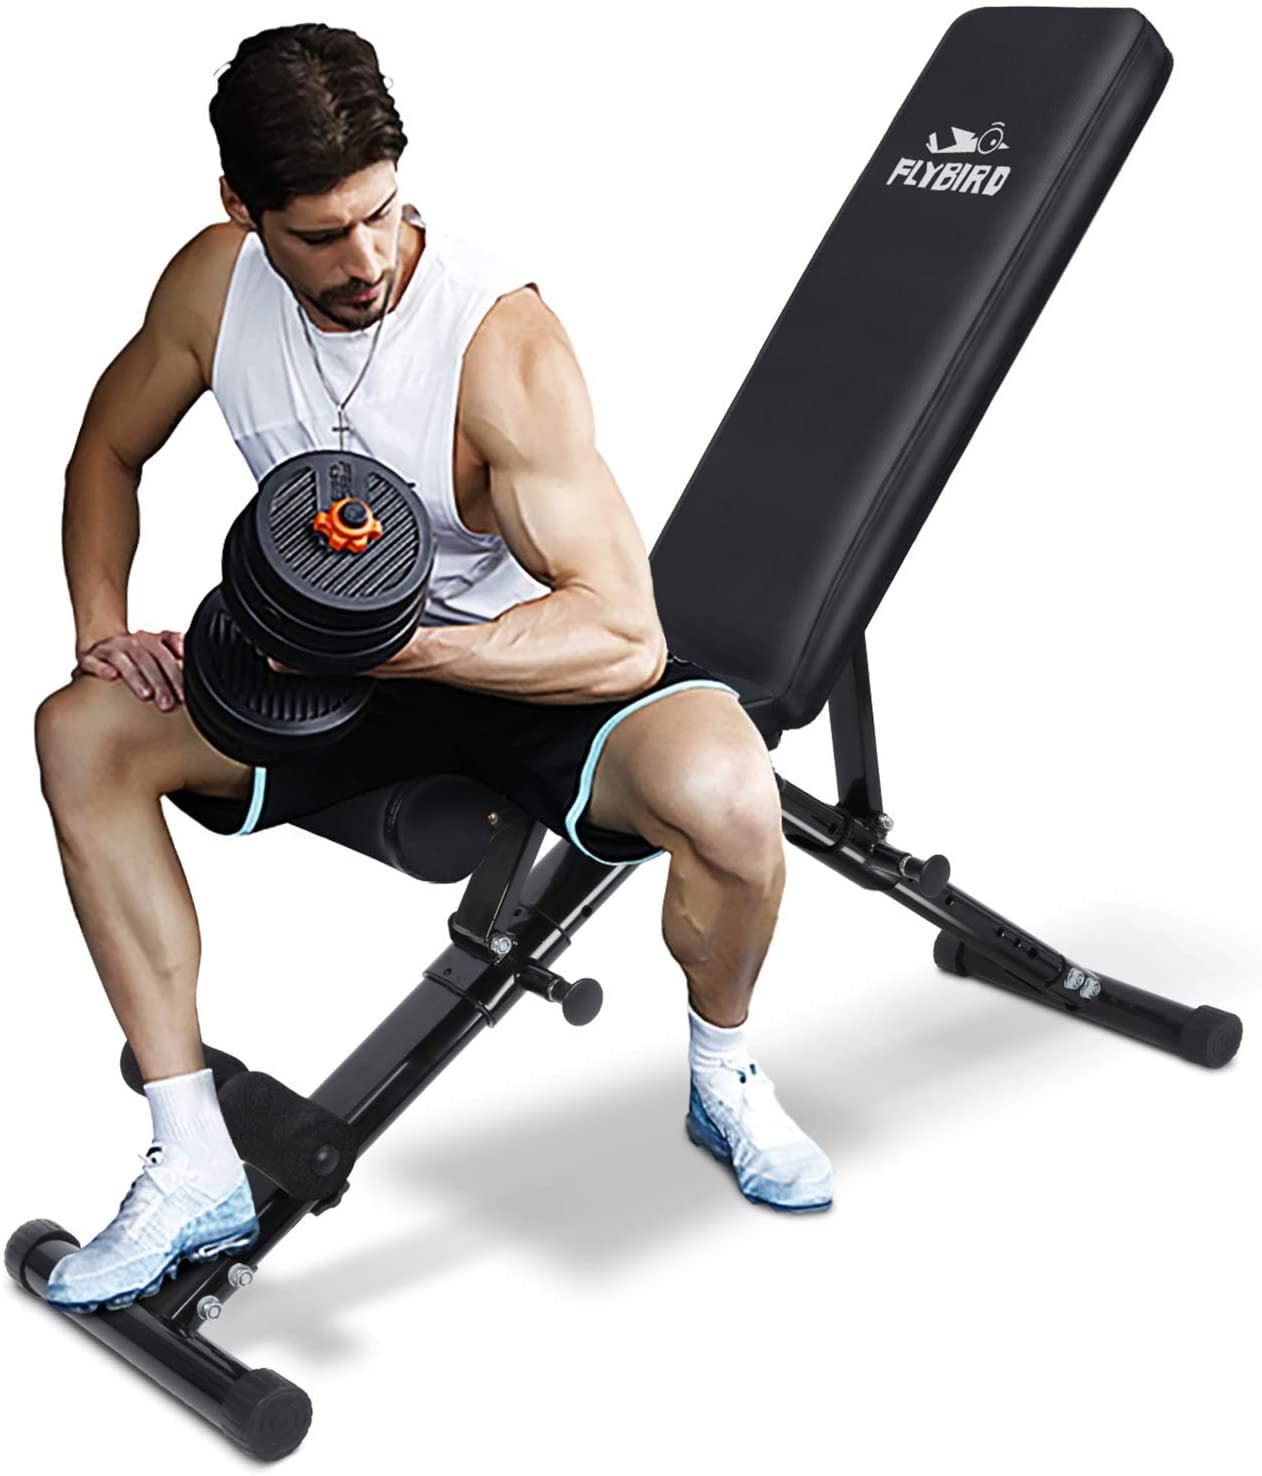 FlyBird Adjustable Weight Bench Lifting Incline Foldable Full Body Workout Gym 